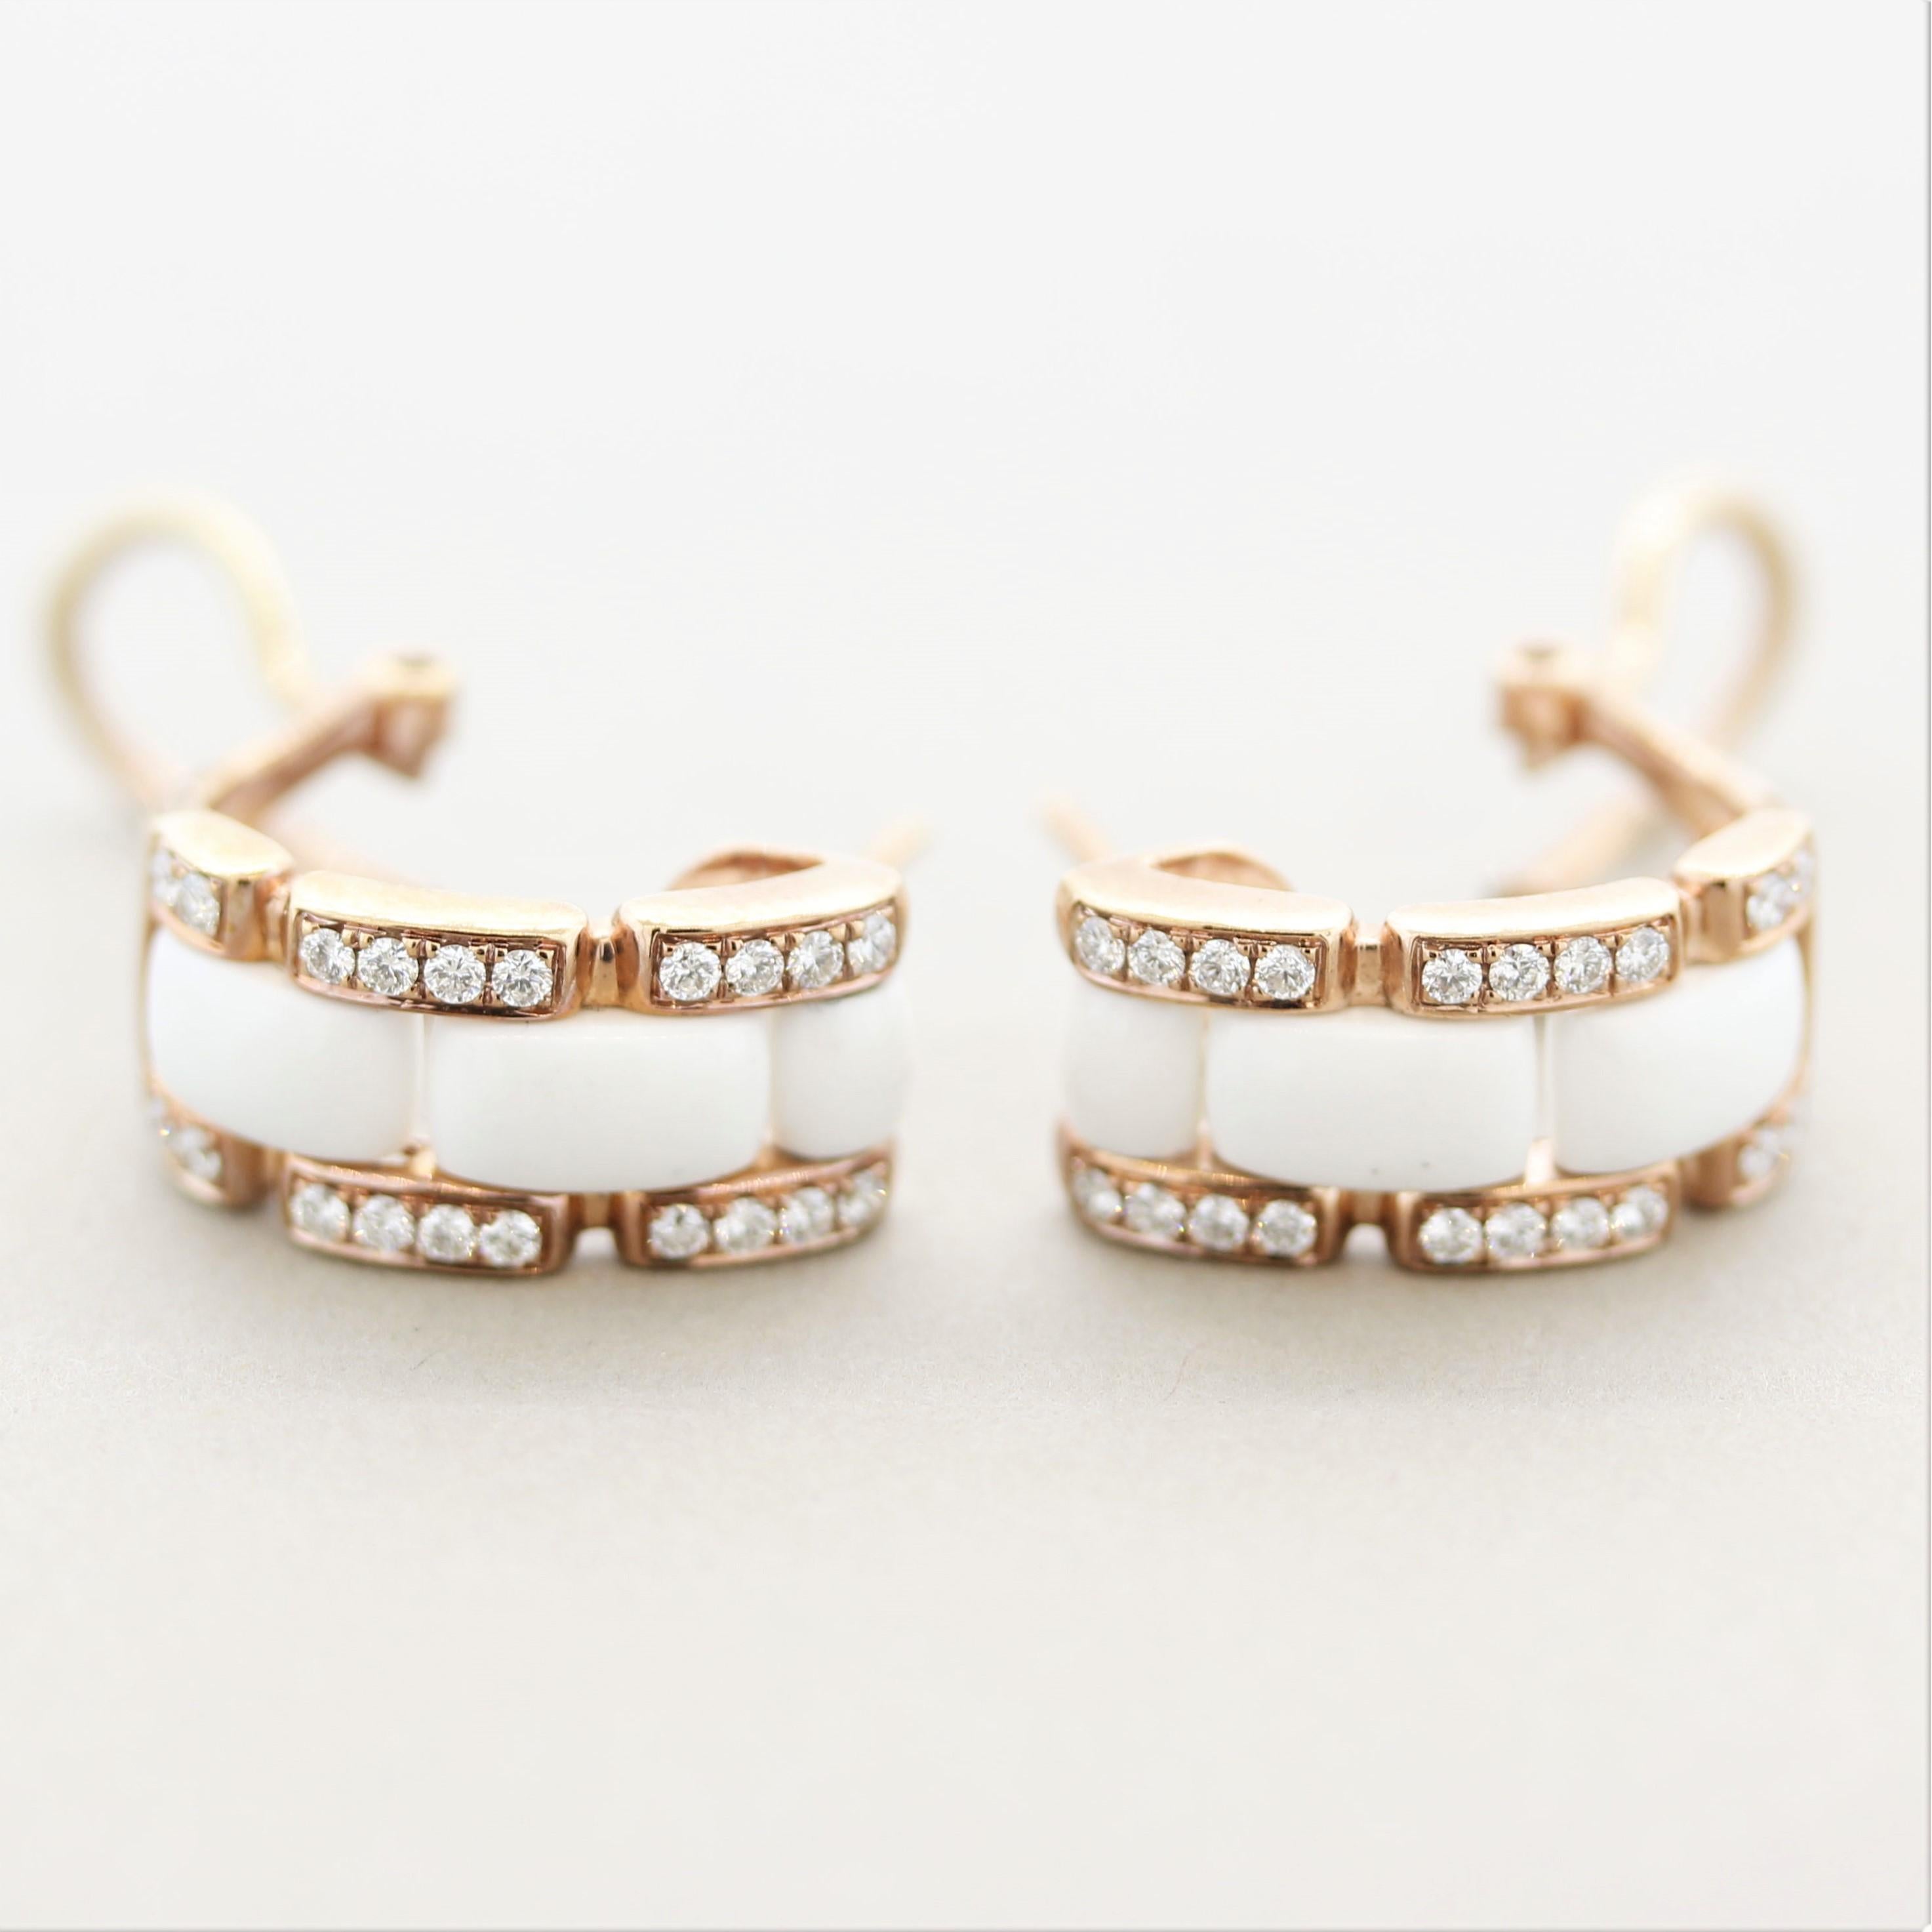 A modern pair of huggie earrings! They feature 6 pieces of smooth bright-white onyx which are accented by 0.39 carats of round brilliant-cut diamonds, adding brilliant and sparkle to the piece. Made in 18k rose gold, the piece has great contrast and